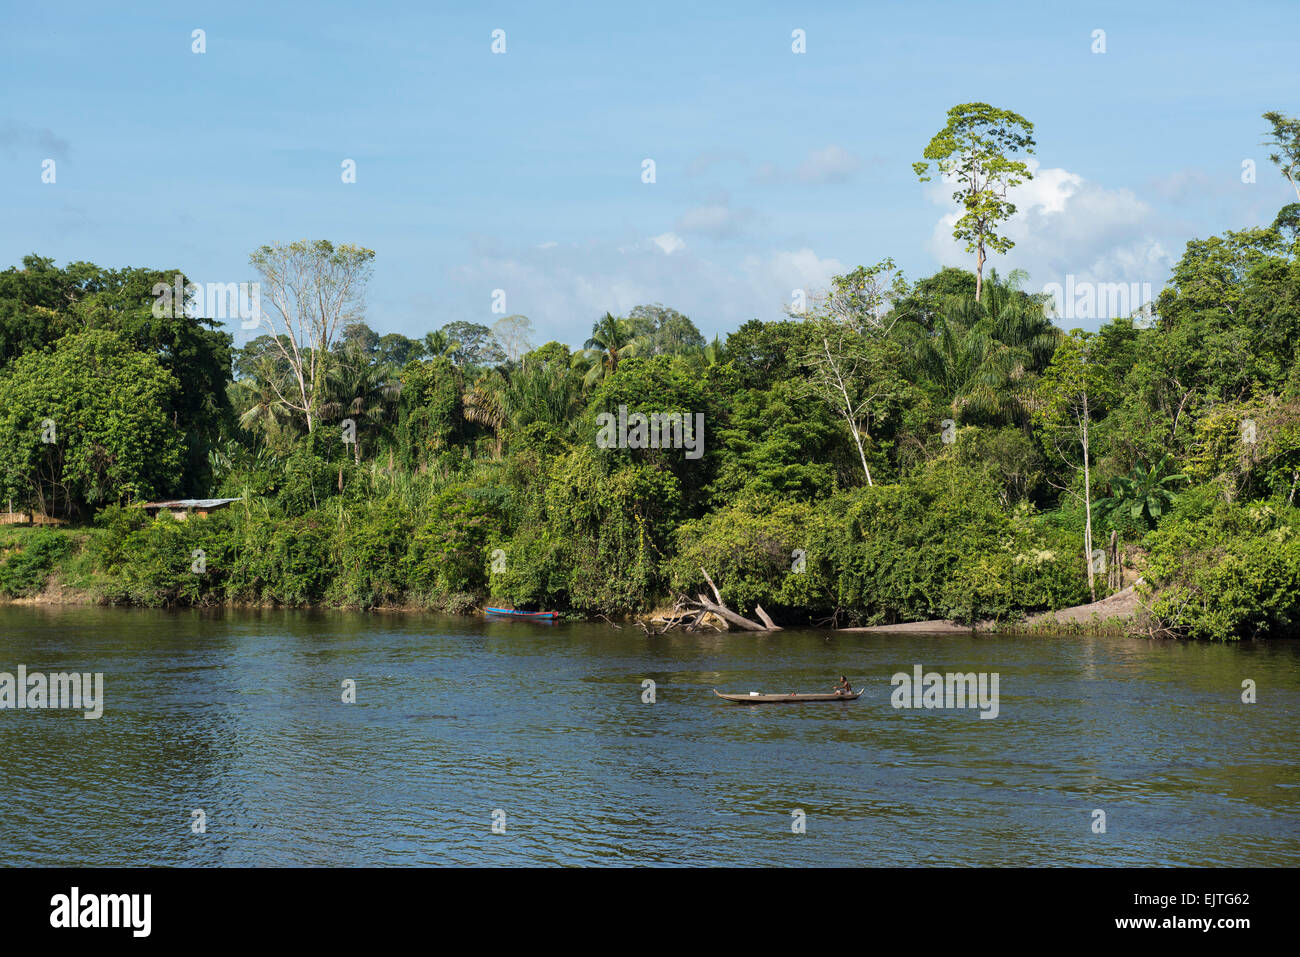 Maroon fisherman canoeing on the Upper Suriname River, Suriname Stock Photo